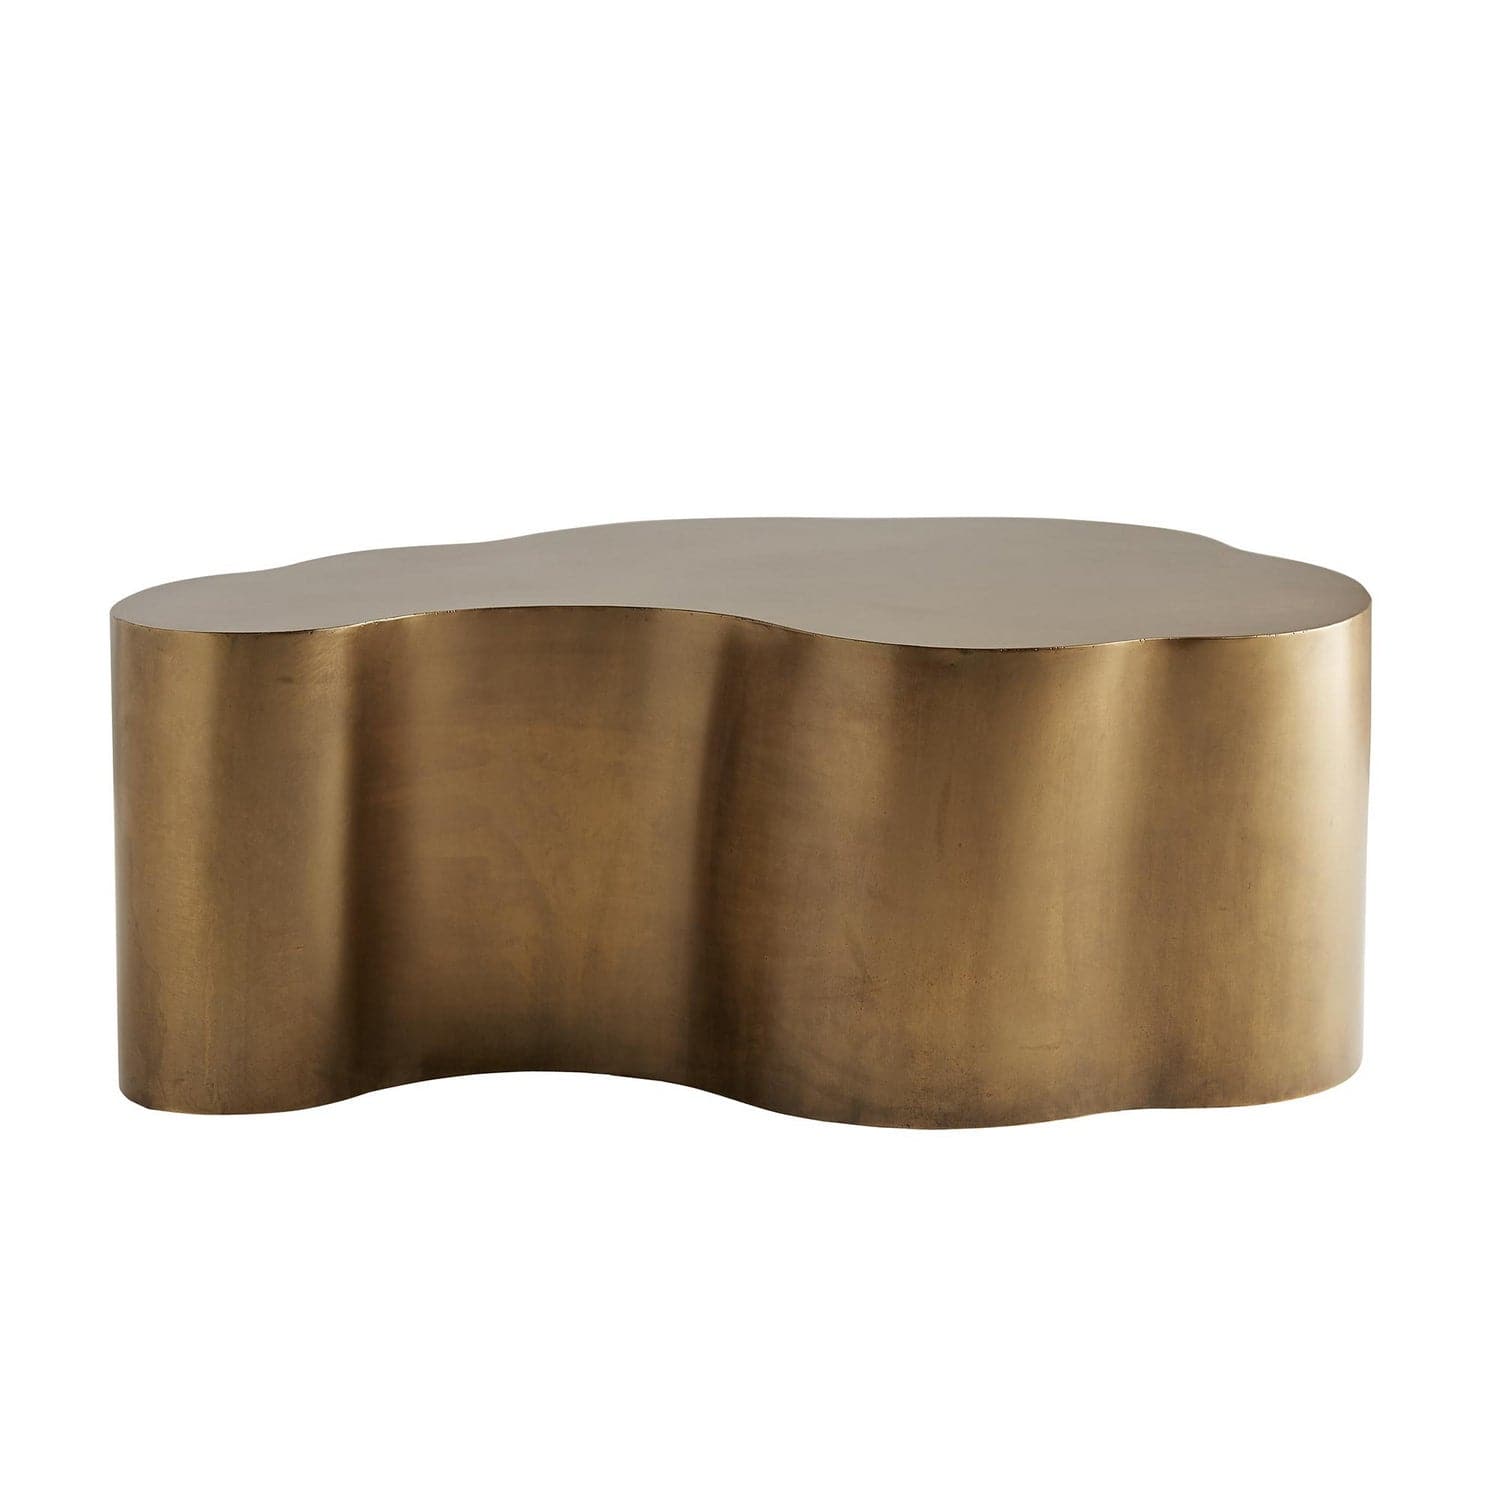 Arteriors - 2100 - Cocktail Table - Meadow - Antique Brass